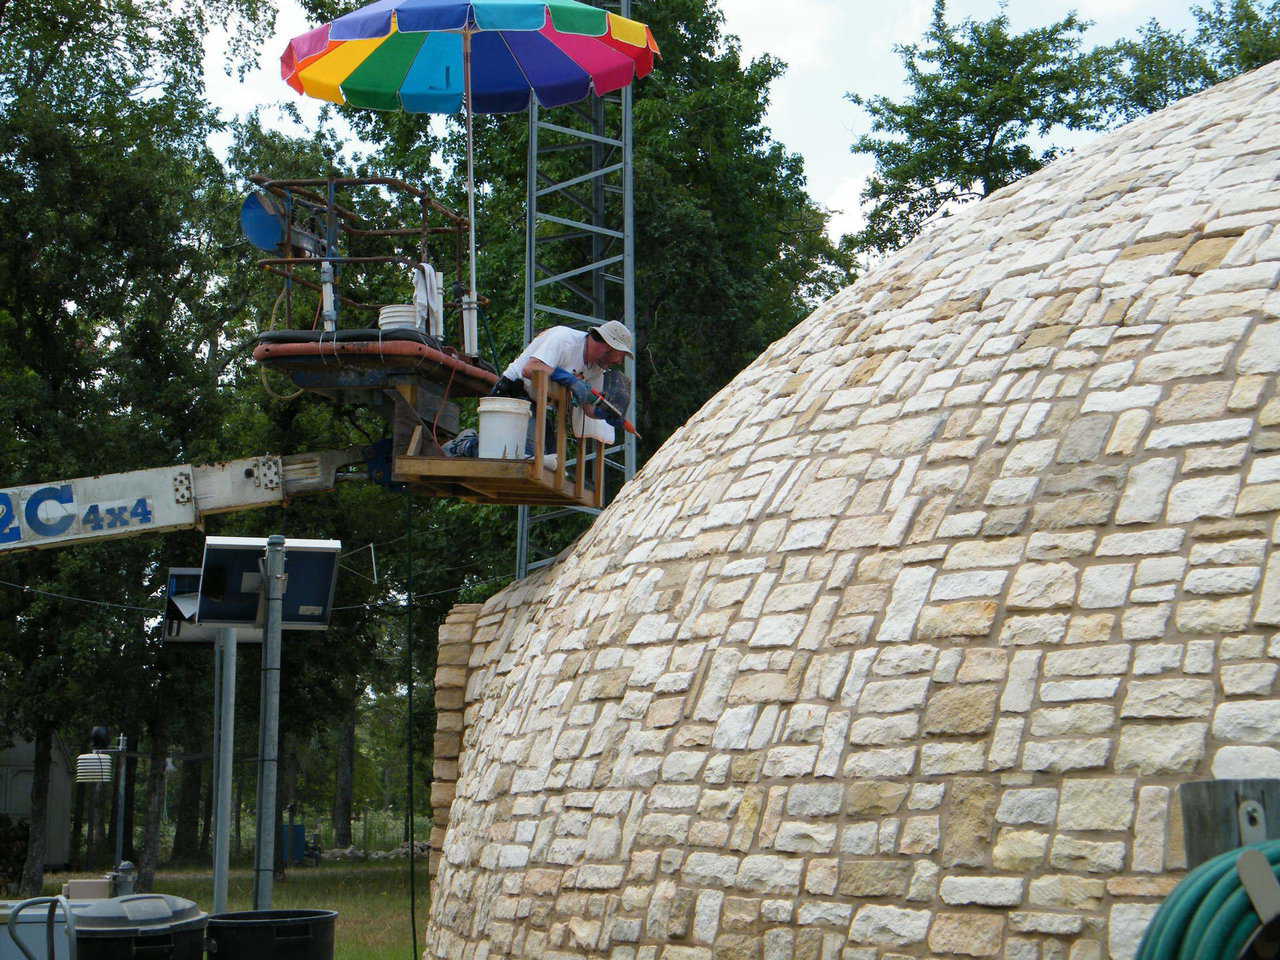 Getting up there! – To stone the very top of the dome, the Tassells used a manlift, loaned to them by Amy and Bob Brooks. 